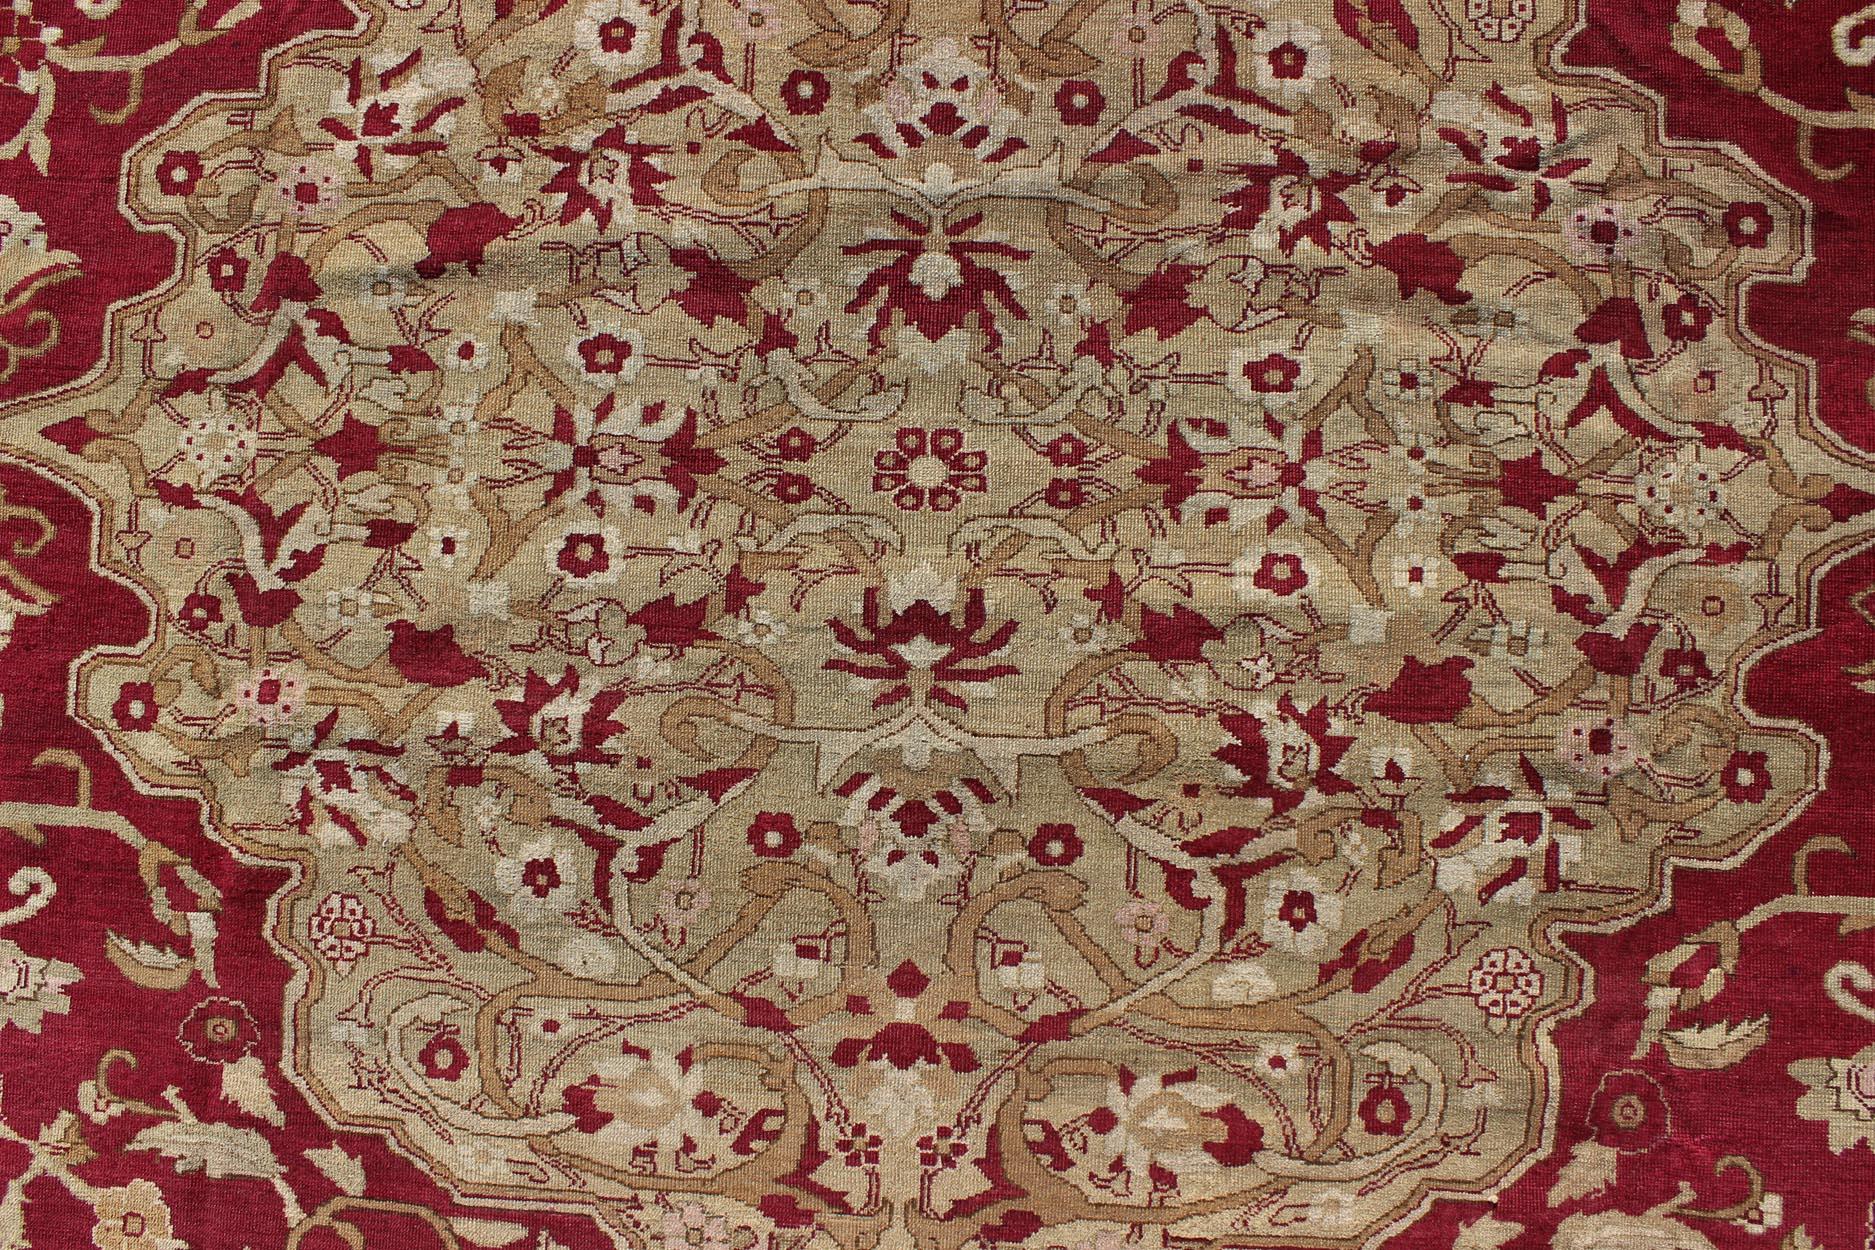 Large Antique Agra Carpet with Floral Design in Red, Taupe and Light Green  1